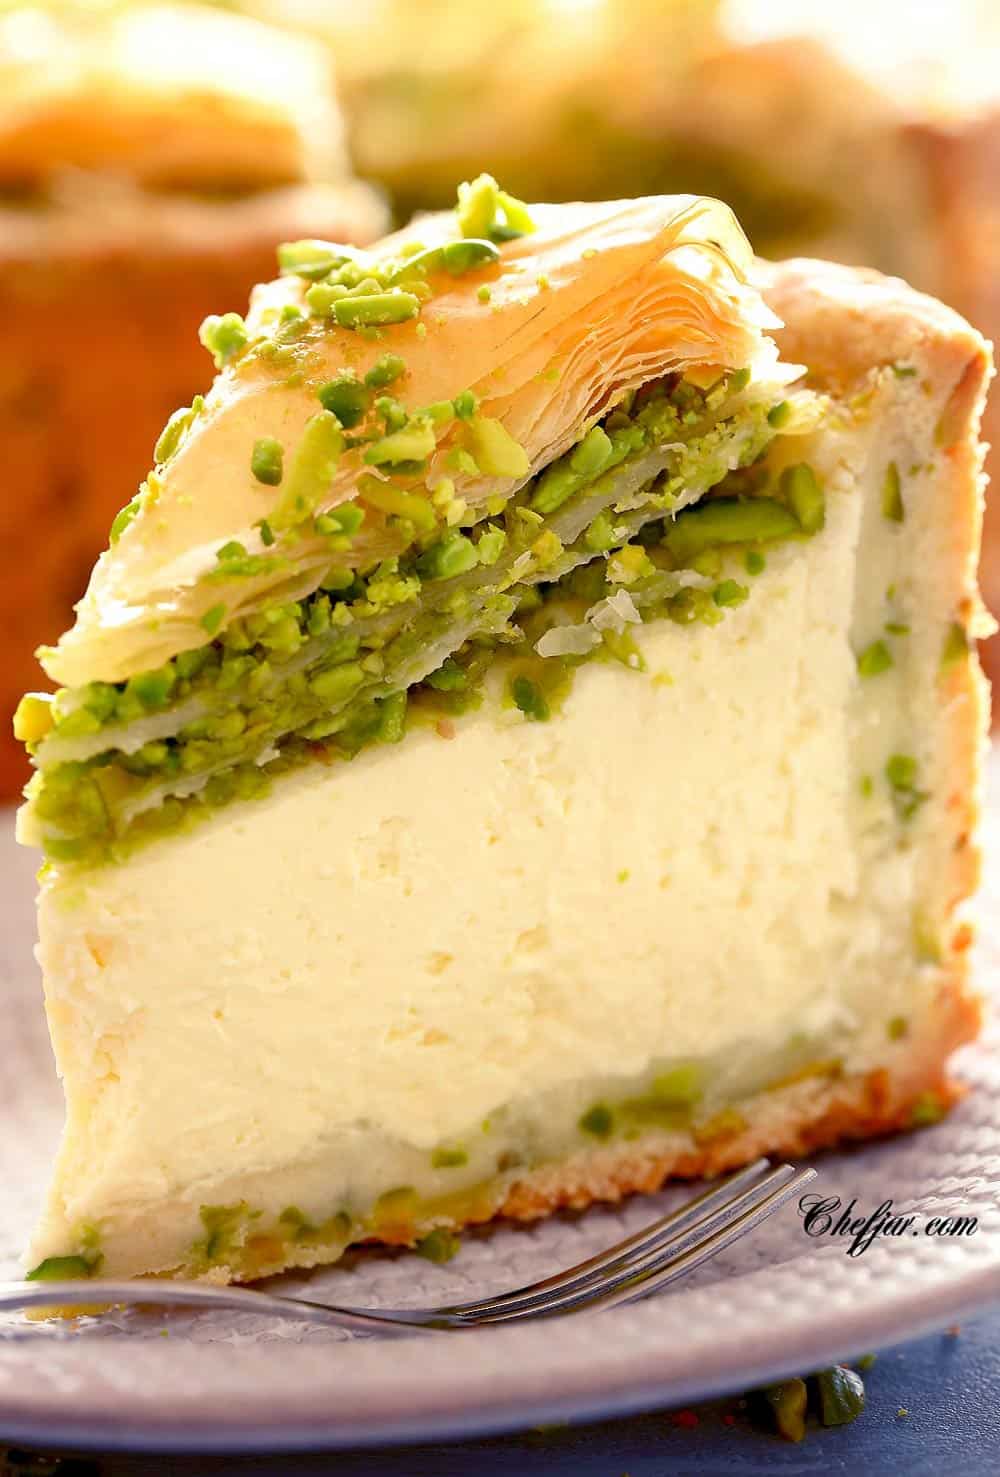 Slice of creamy cheesecake on white plate A rich, creamy, PERFECT Pistachio Baklava Cheesecake Recipe! Oh, and there's NO water bath required! #cheesecake #cheesecakerecipe #pistachiocheesecake